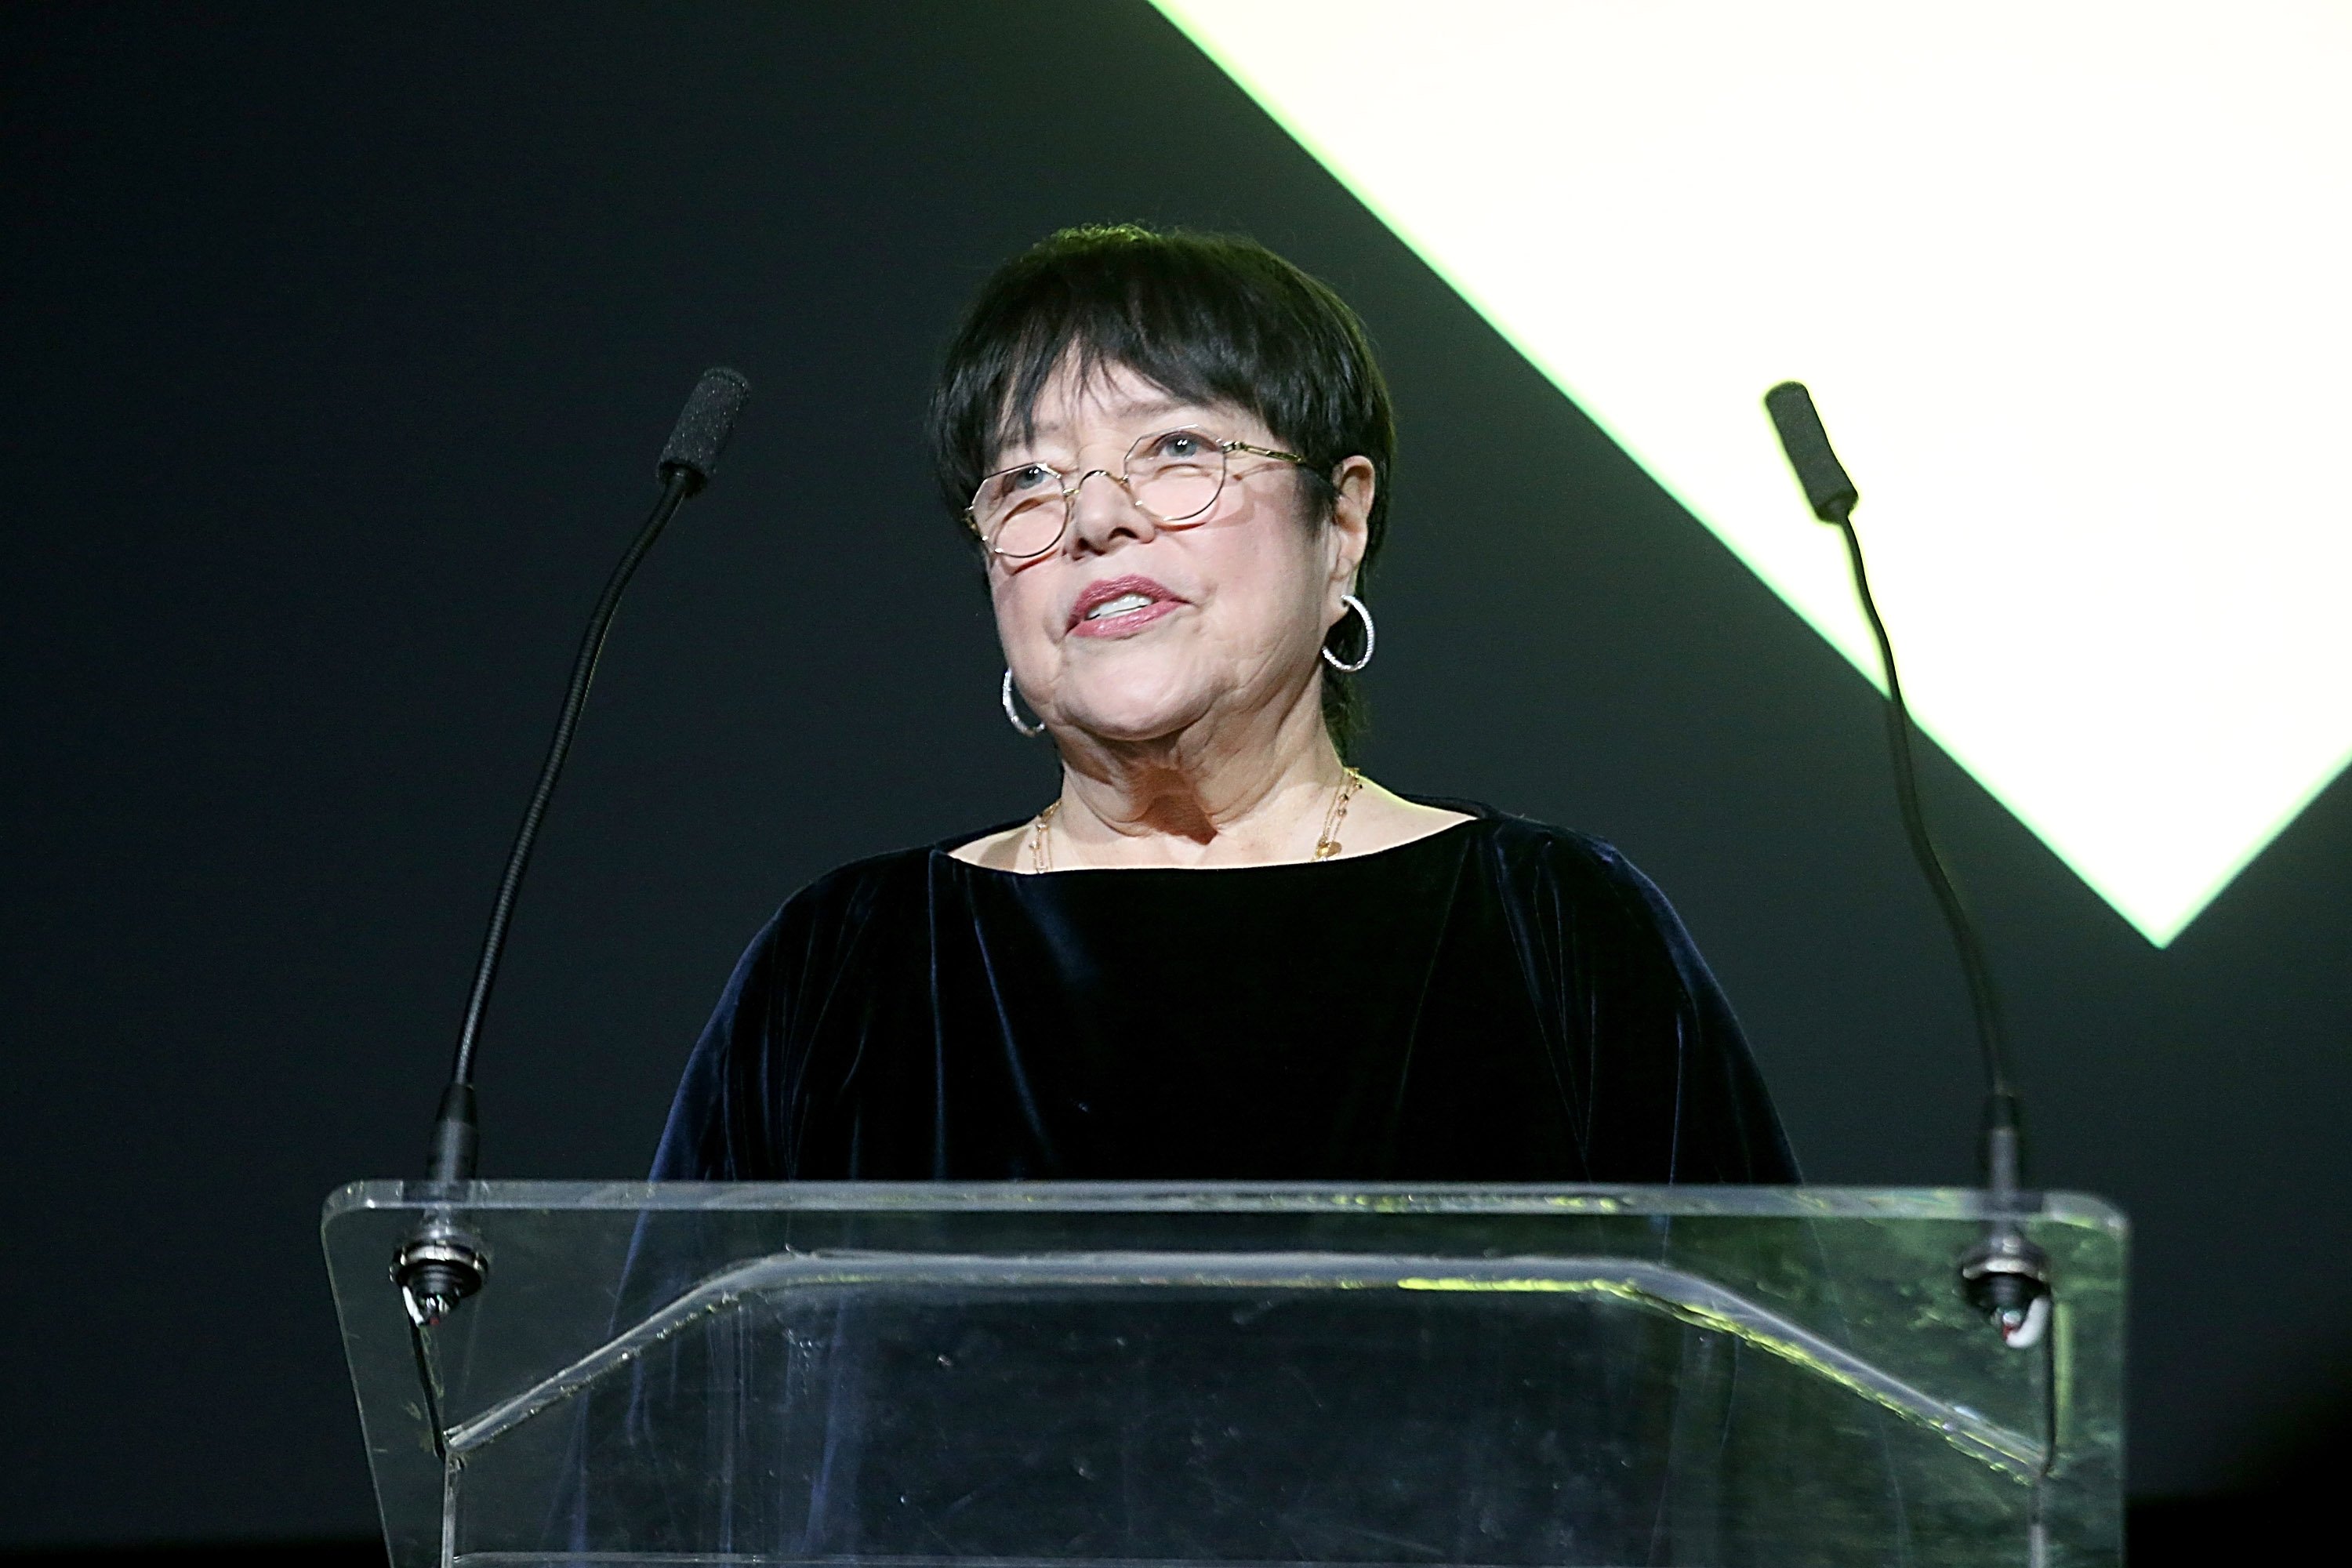 Kathy Bates at the Austin Film Society's Texas Film Awards on March 7, 2019, in Austin, Texas. | Source: Gary Miller/Getty Images